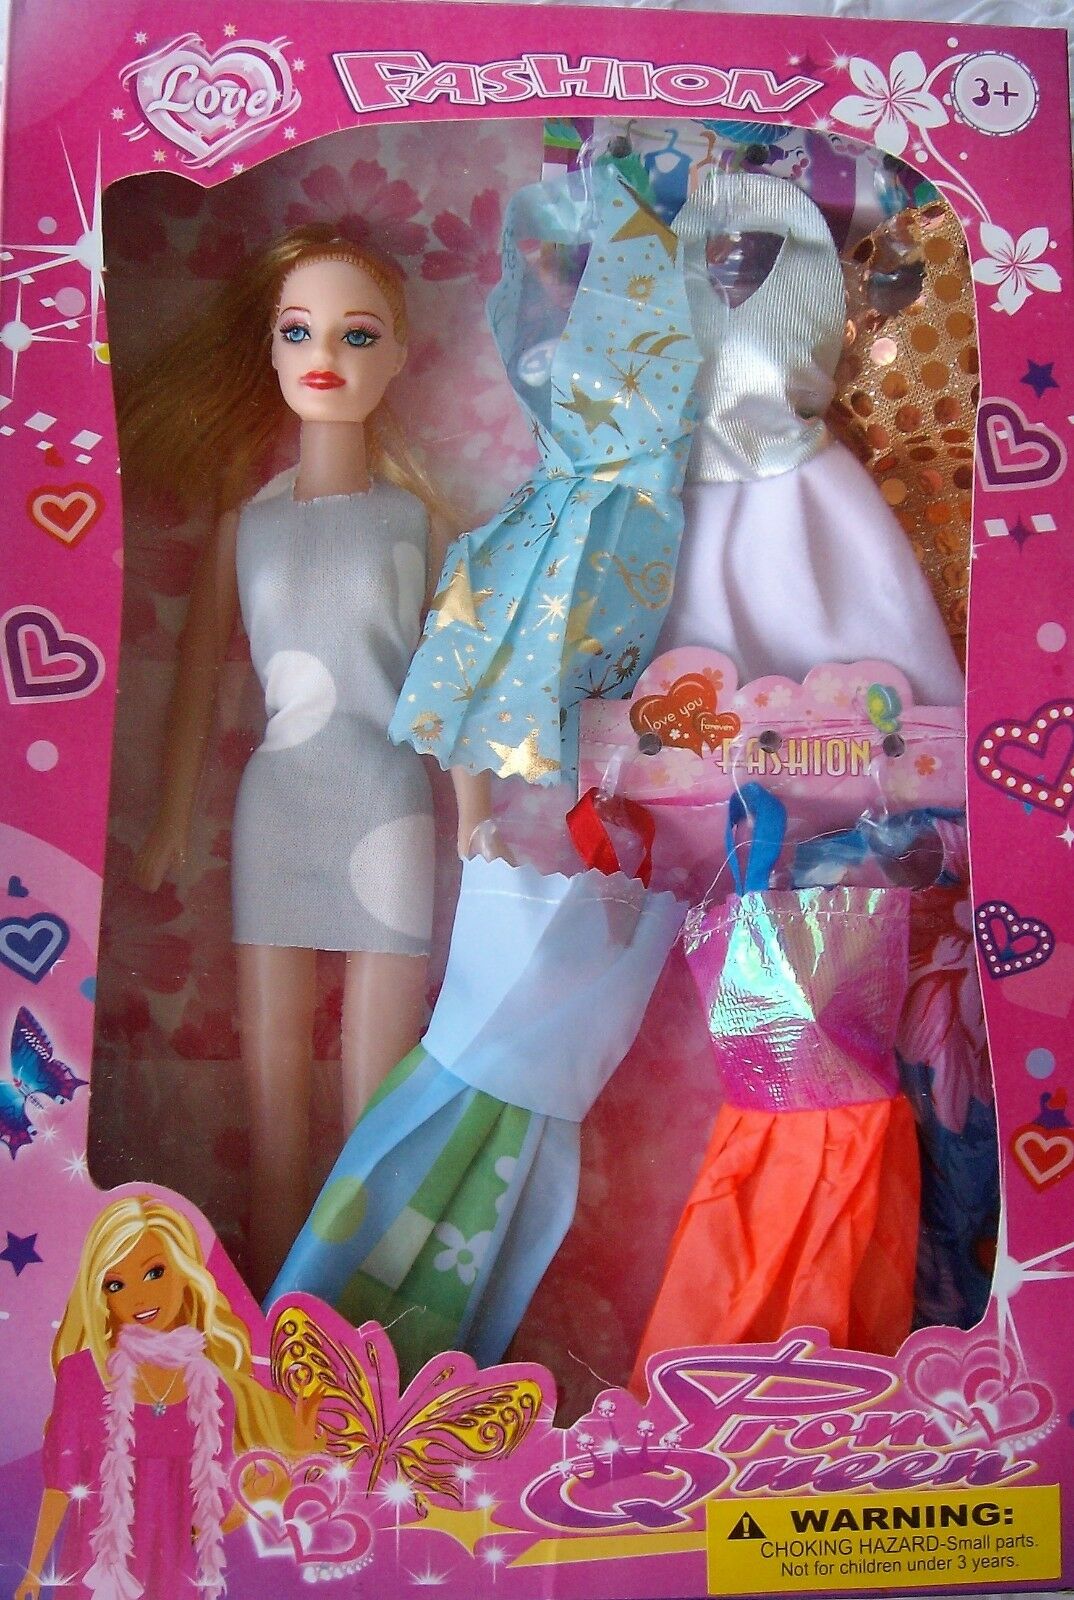 Pretty Girl Prom Queen Vogue Fashion Doll With Dresses # 63057 (blue, Moon)